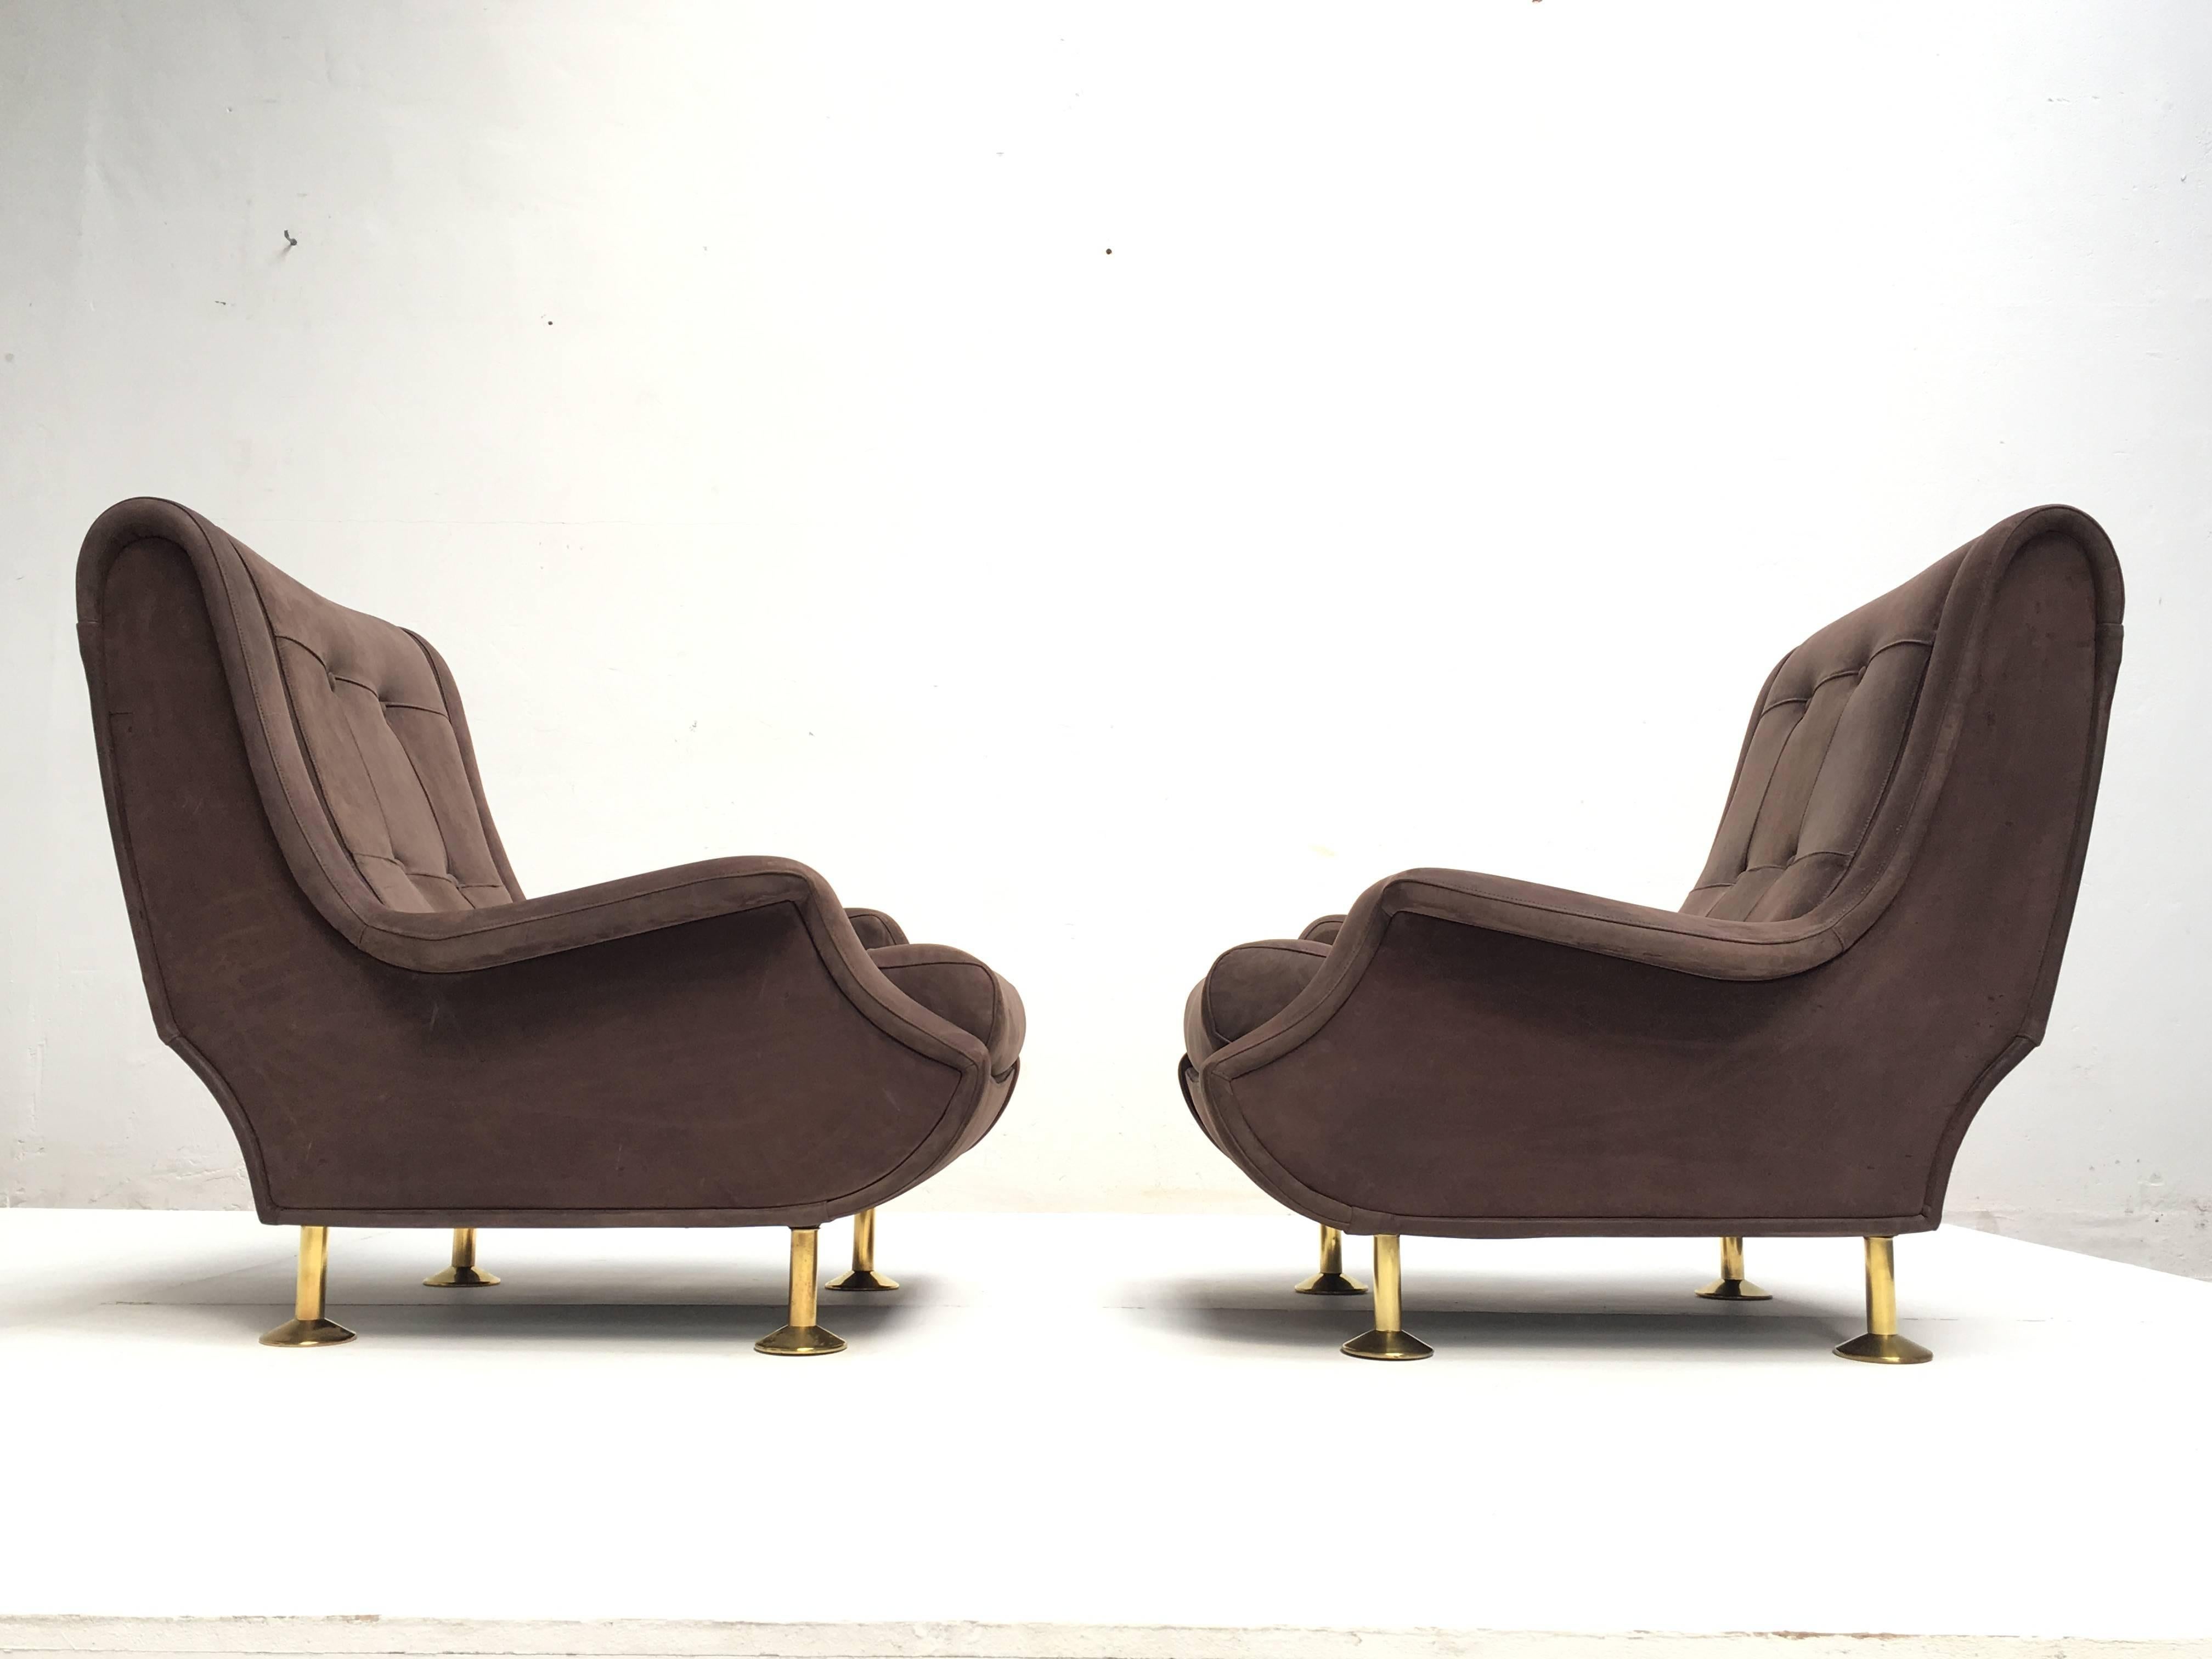 Beautiful pair of Zanuso 'Regent' chairs designed by Marco Zanuso for Arflex, Italy in 1960. This pair have been fully restored from the bare frames up including new Pirelli rubber webbing, new Latex rubber foam and beautiful high quality chocolate